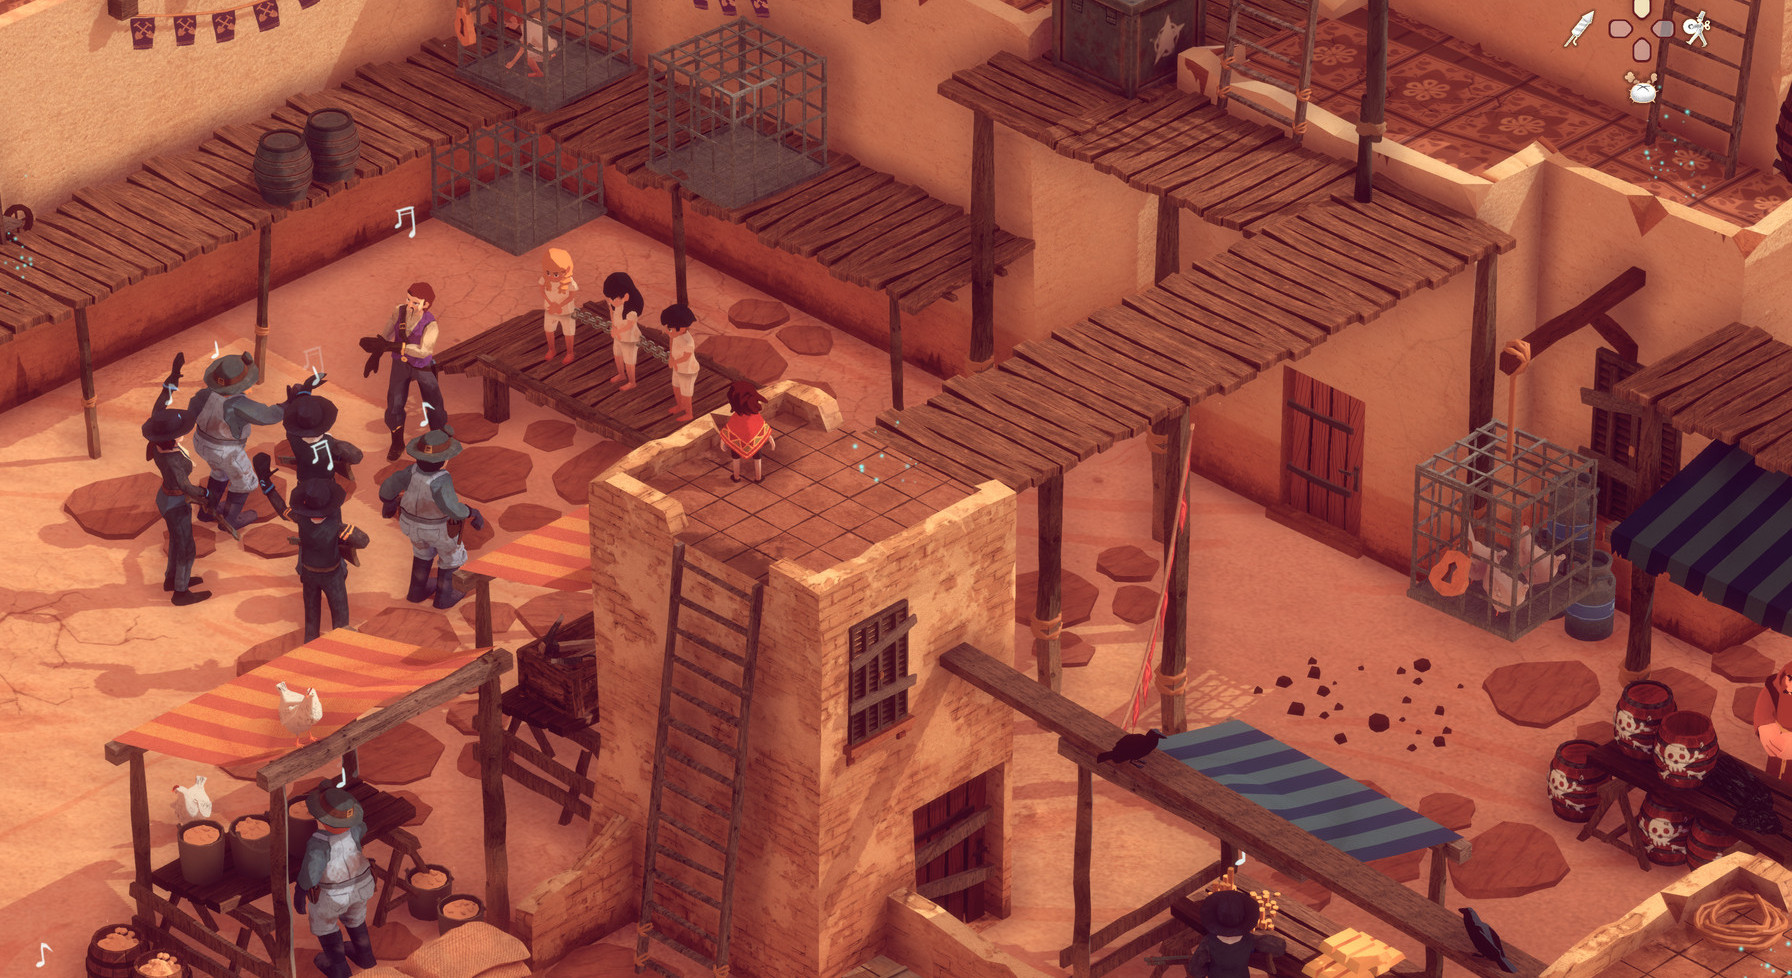 Game: El Hijo - A Wild West Tale Review